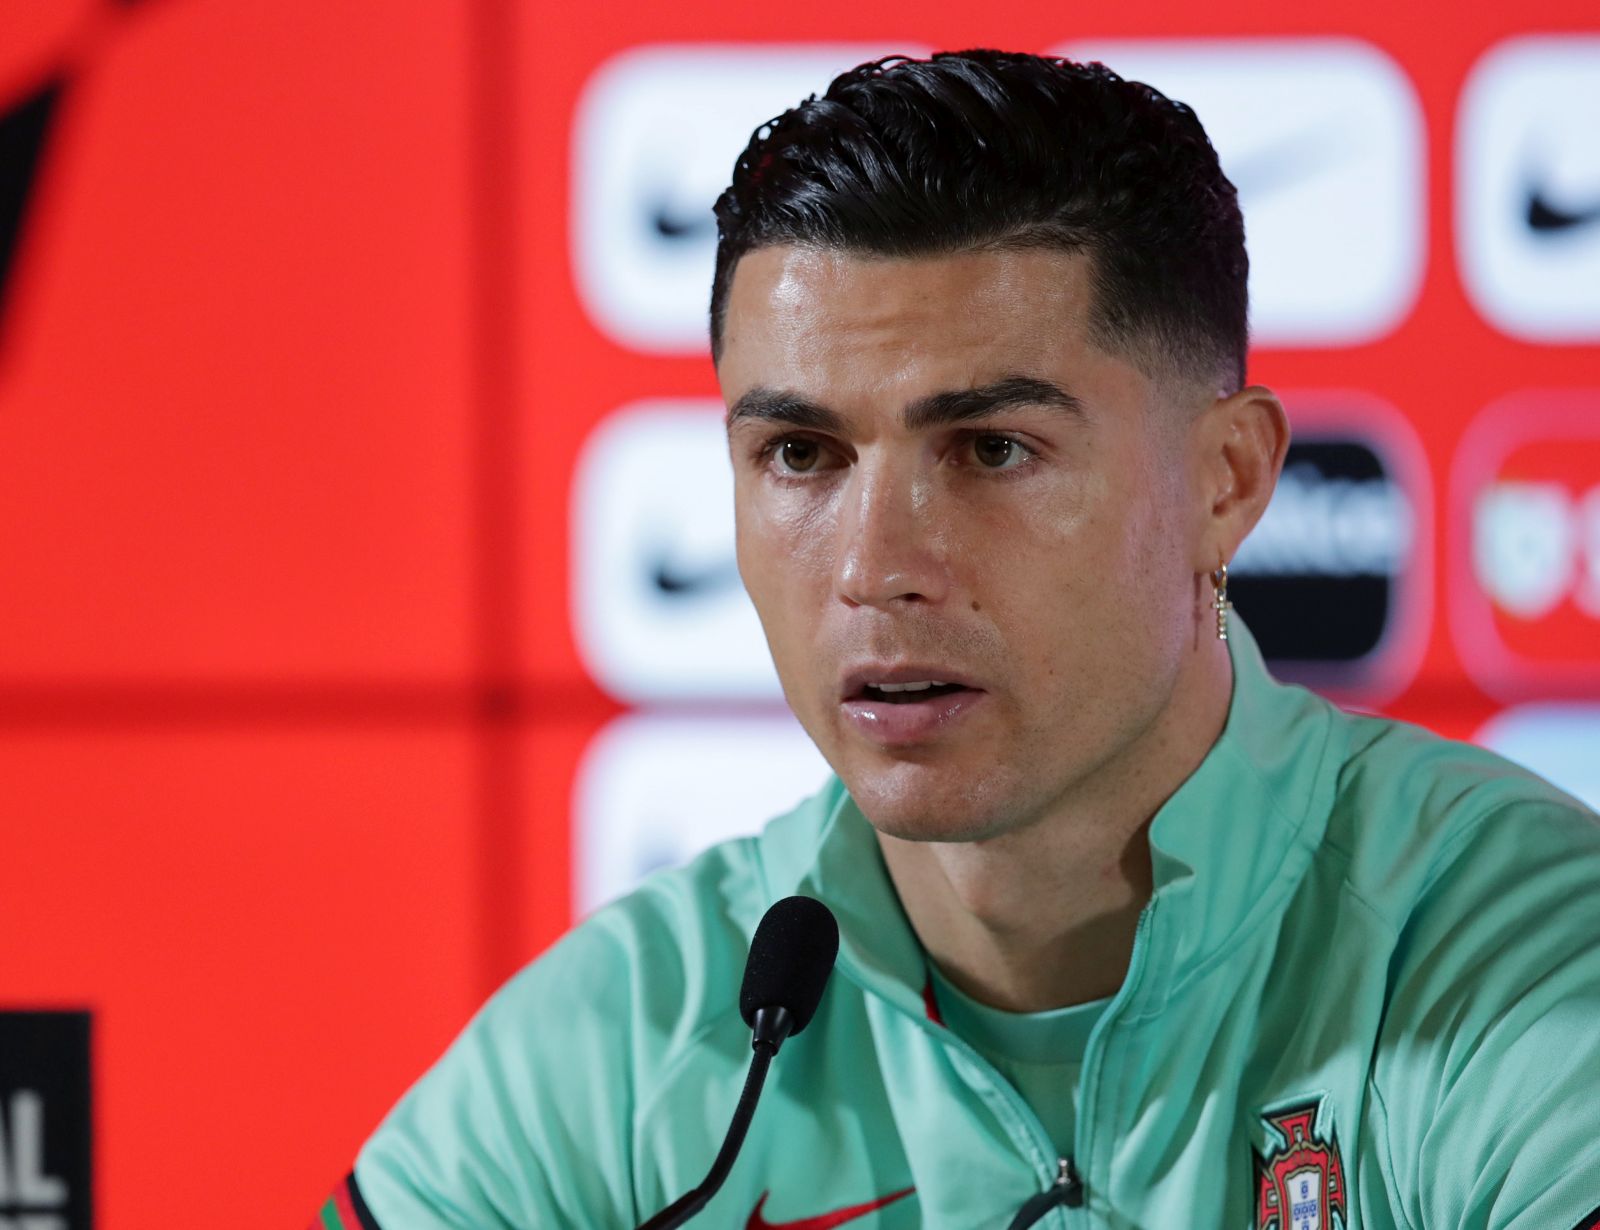 epa09855621 Portugal's player Cristiano Ronaldo attends a press conference at Dragao stadium in Porto, Portugal, 28 March 2022.  Portugal will face North Macedonia in their FIFA World Cup Qatar 2022 play-off qualifying soccer match on 29 March 2022.  EPA/ESTELA SILVA